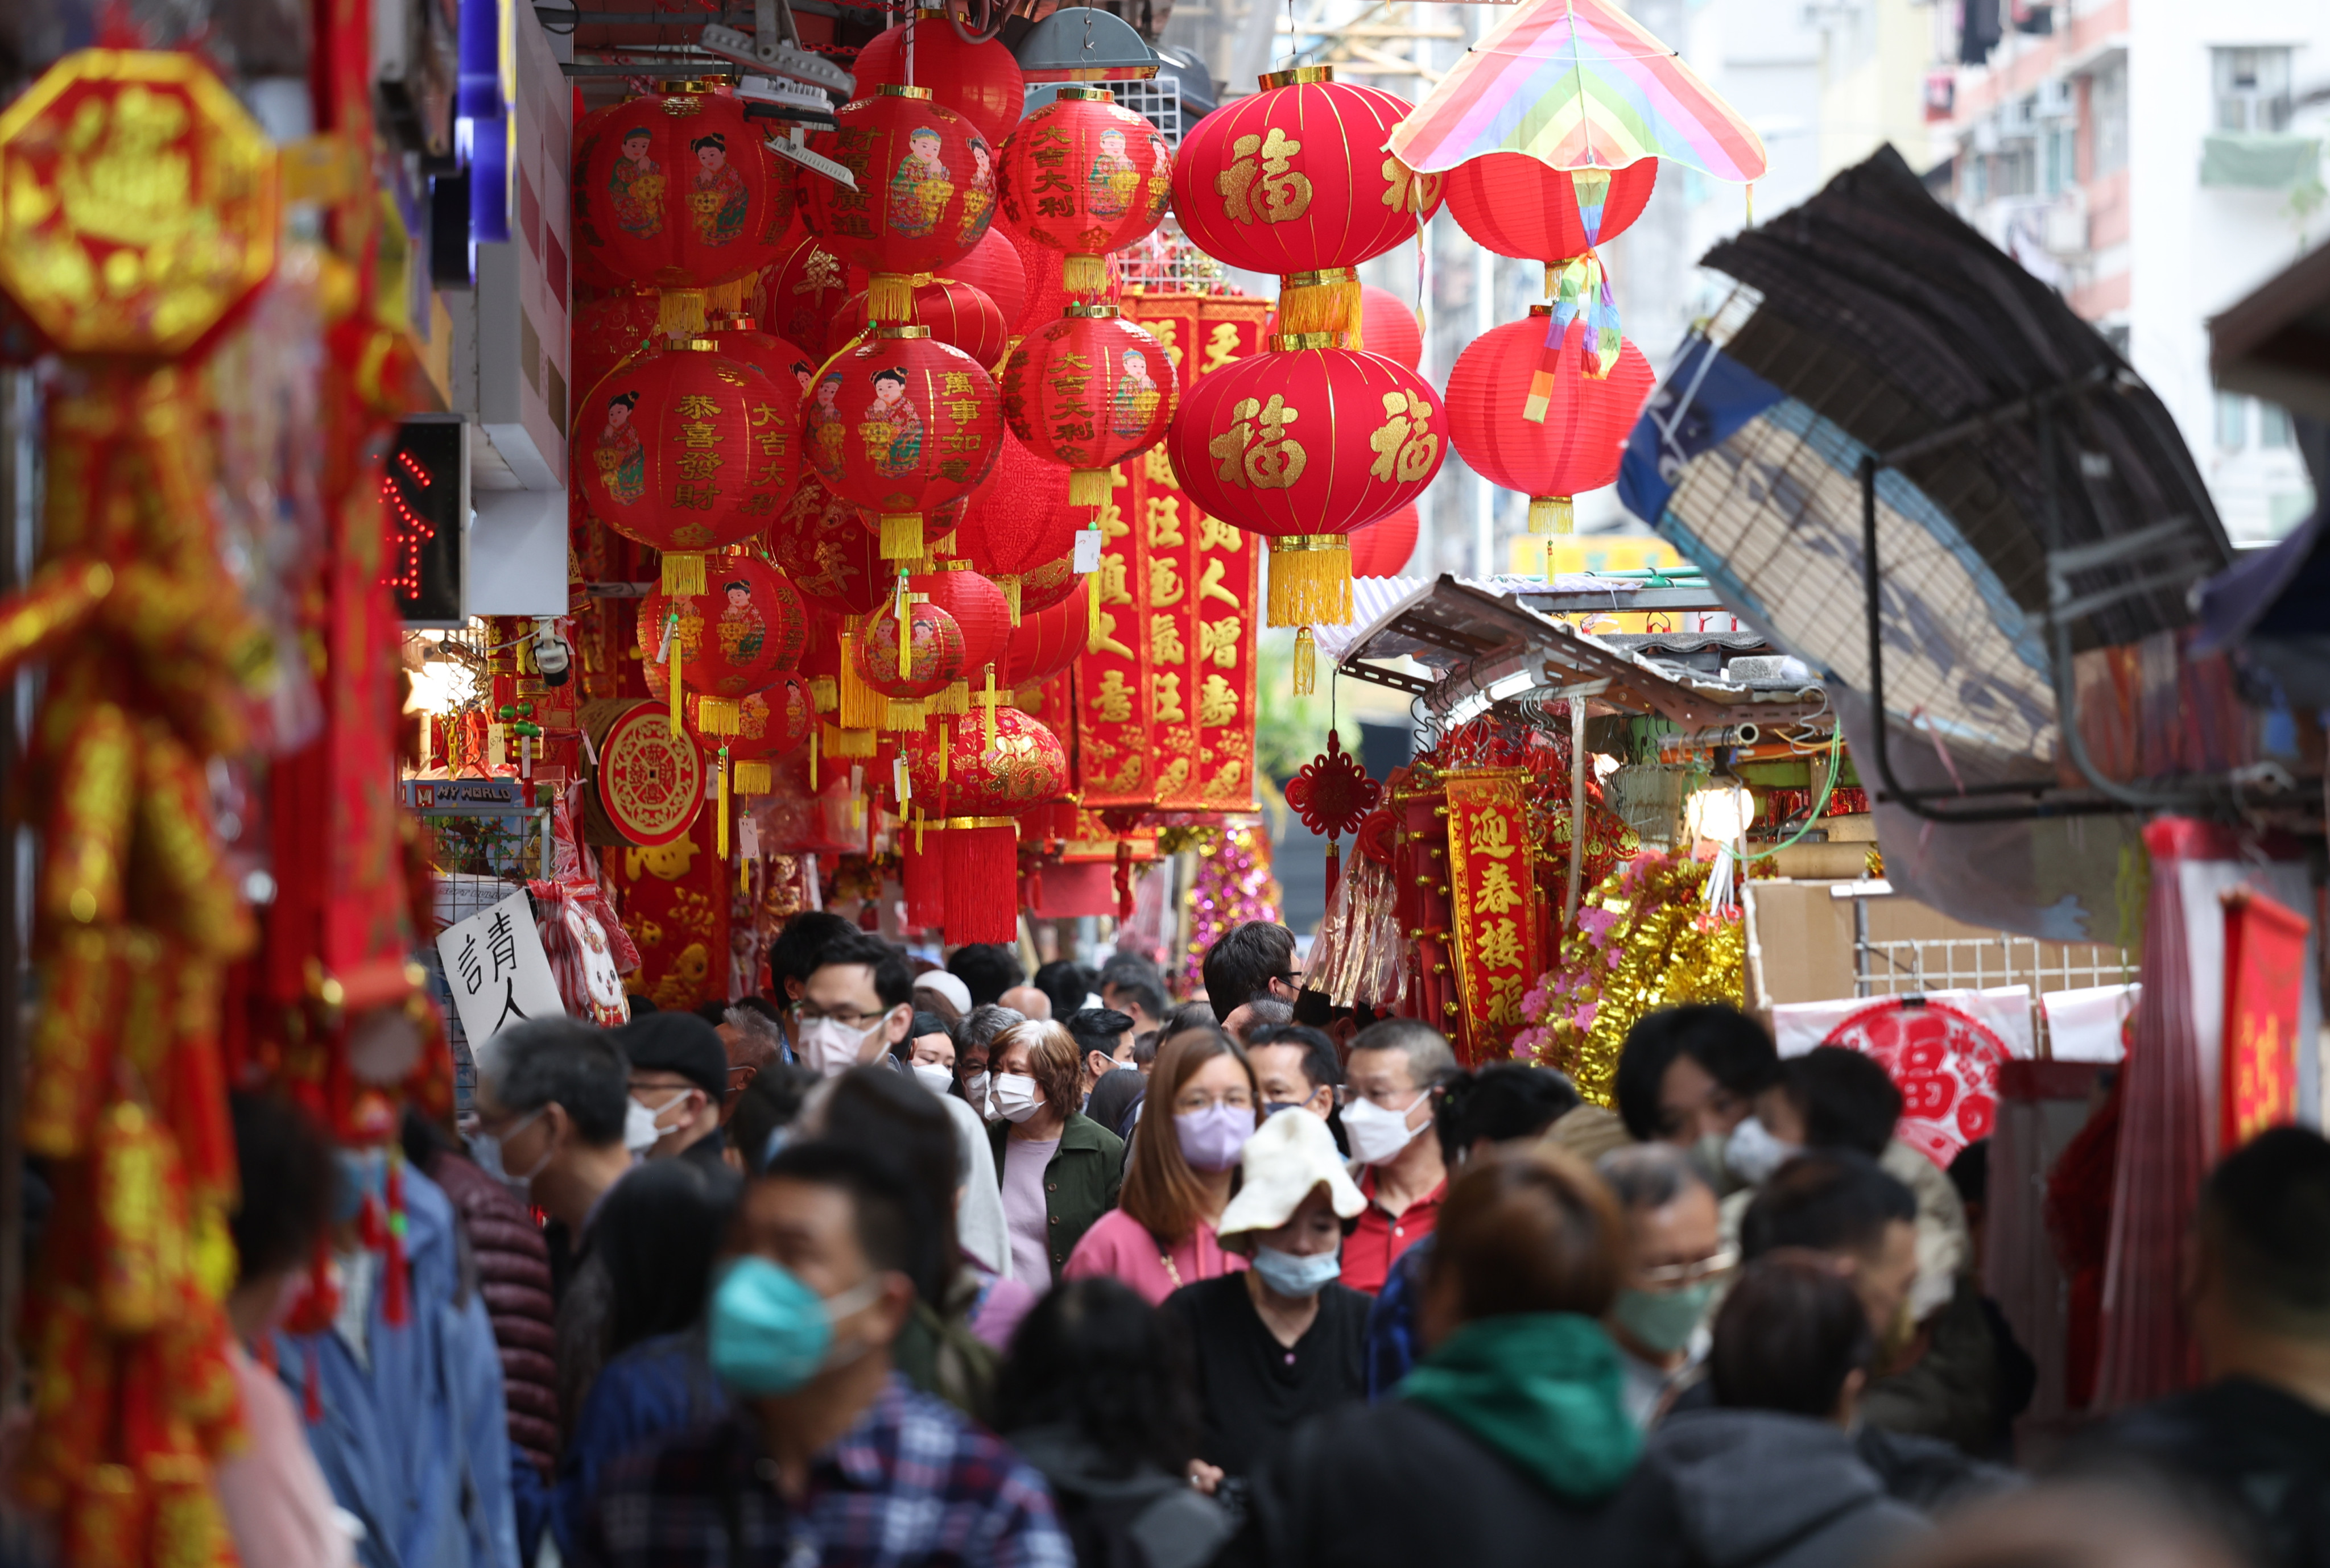 Crowds walk past Lunar New Year decorations in Hong Kong’s Sham Shui Po district on January 2. Photo: Yik Yeung-man